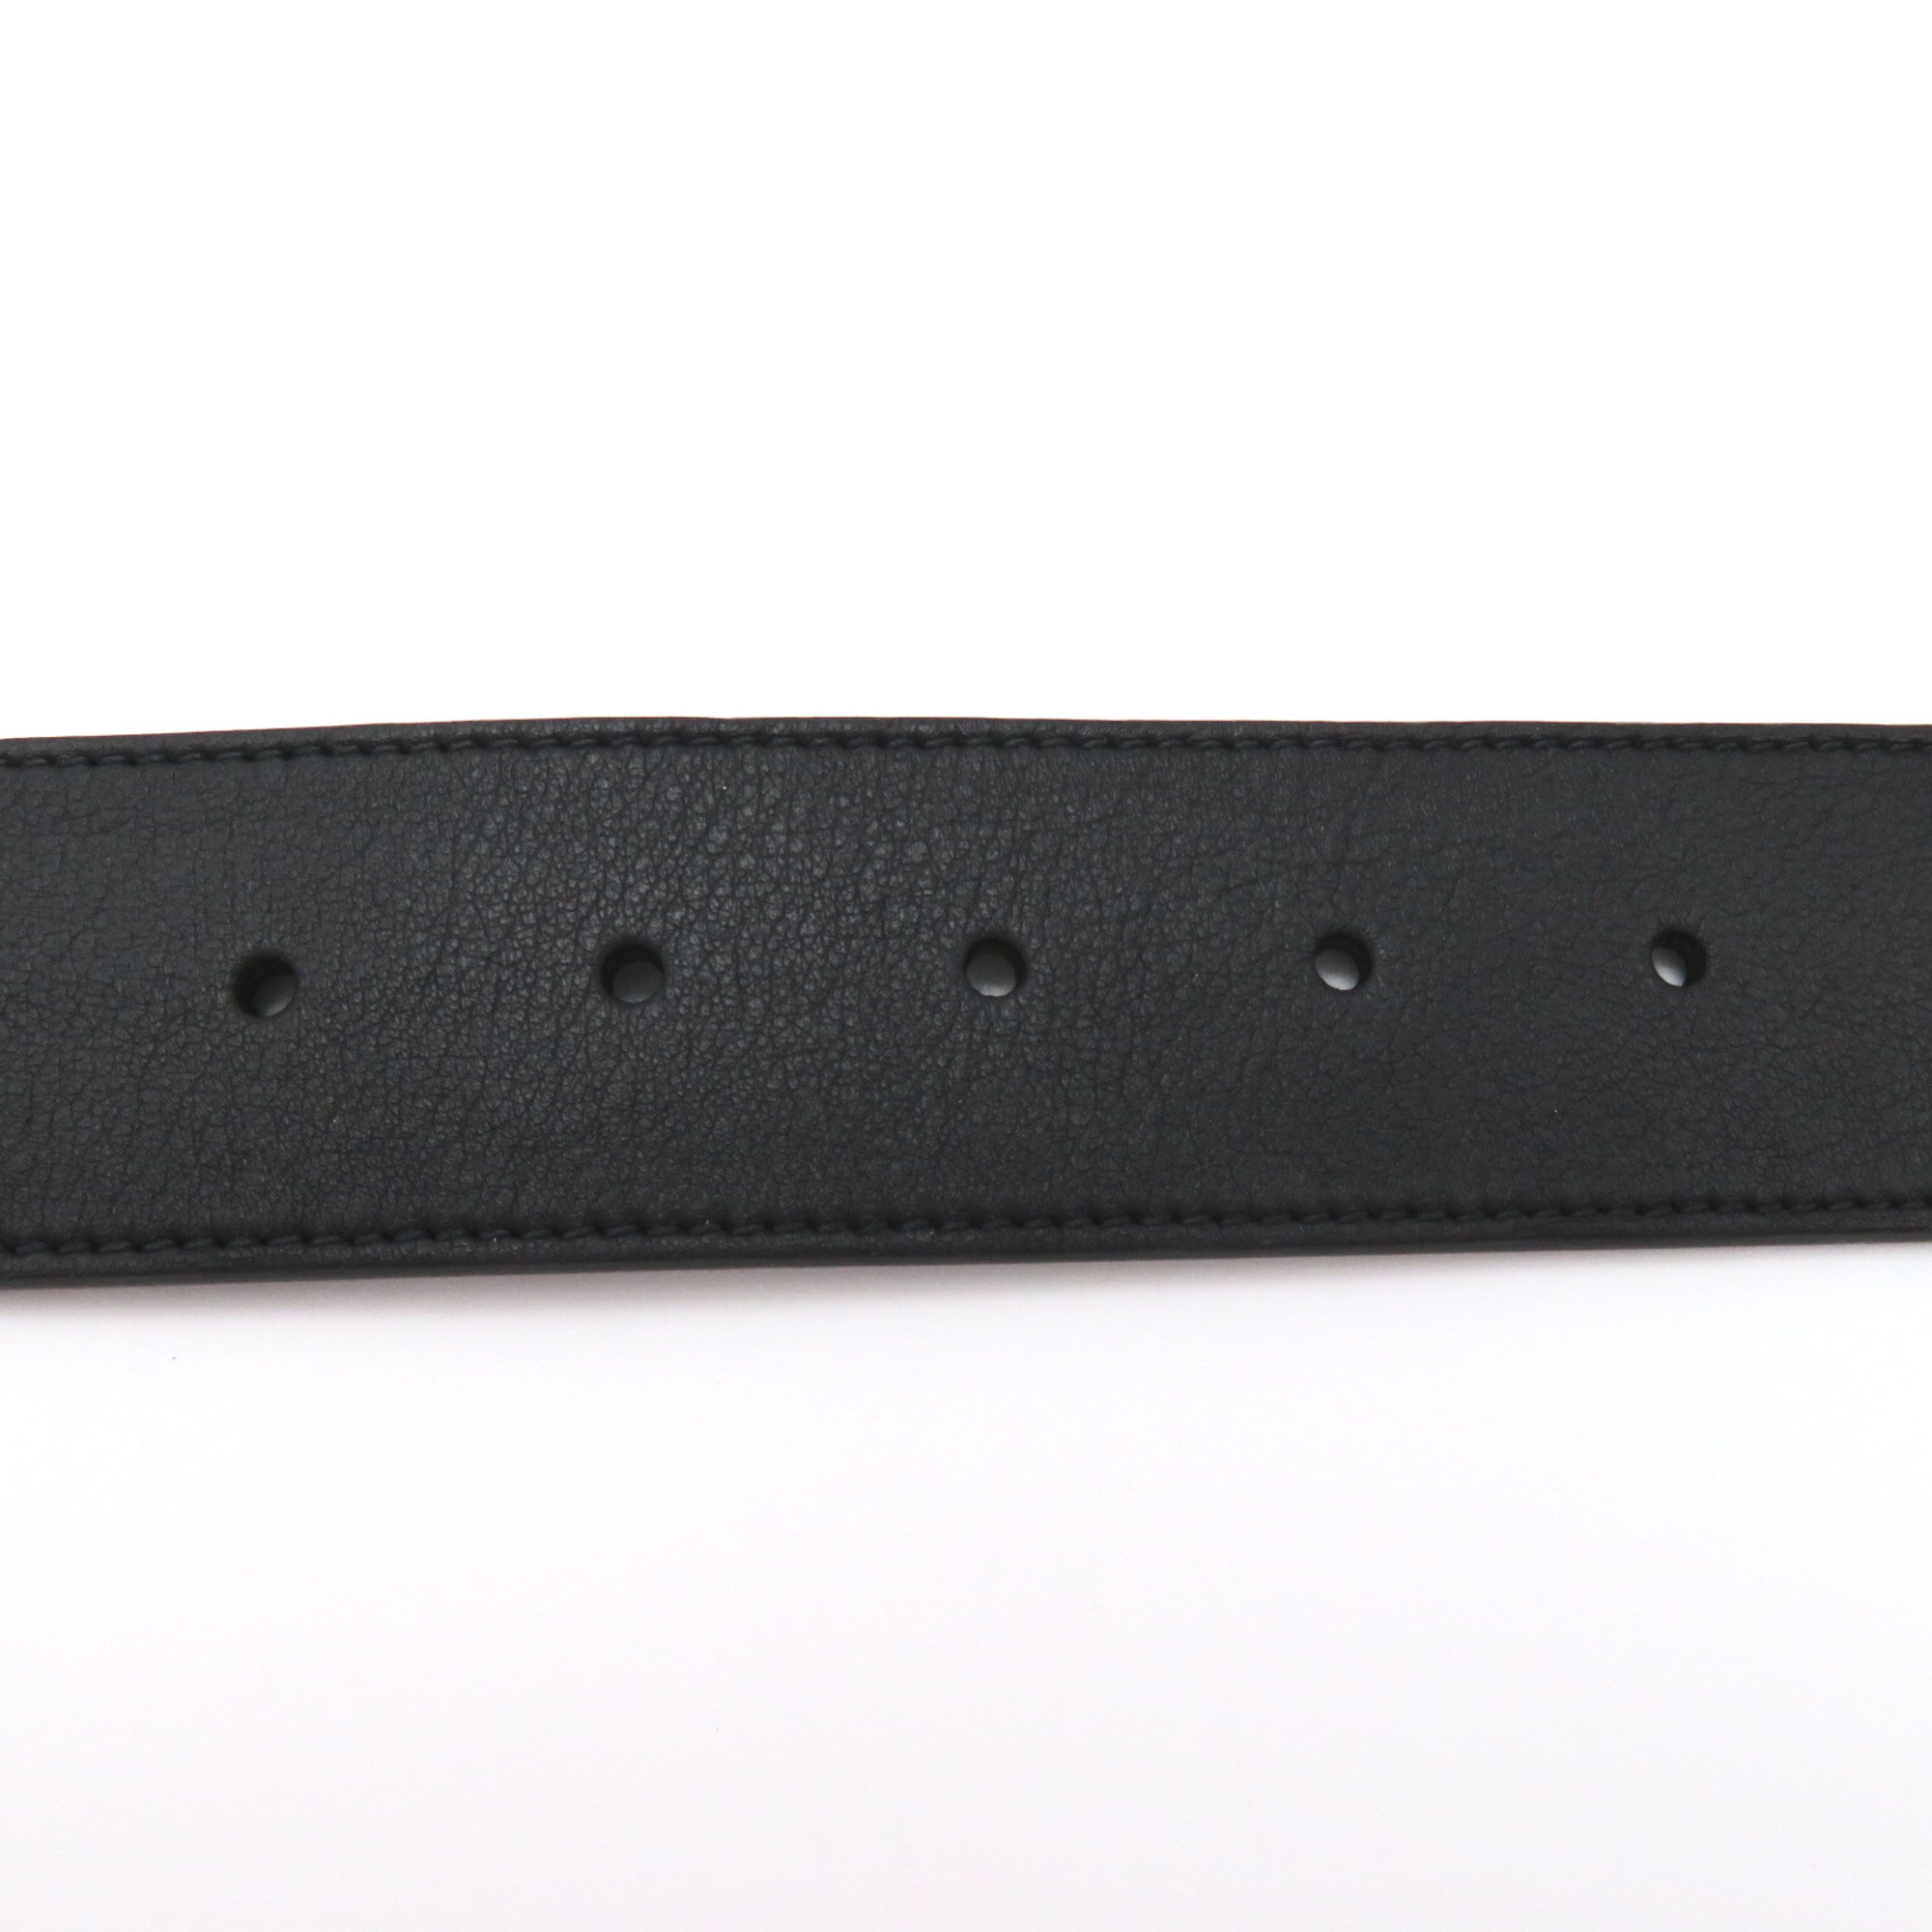 GUCCI GG Marmont leather belt Black leather 397660AAA5Z1000100